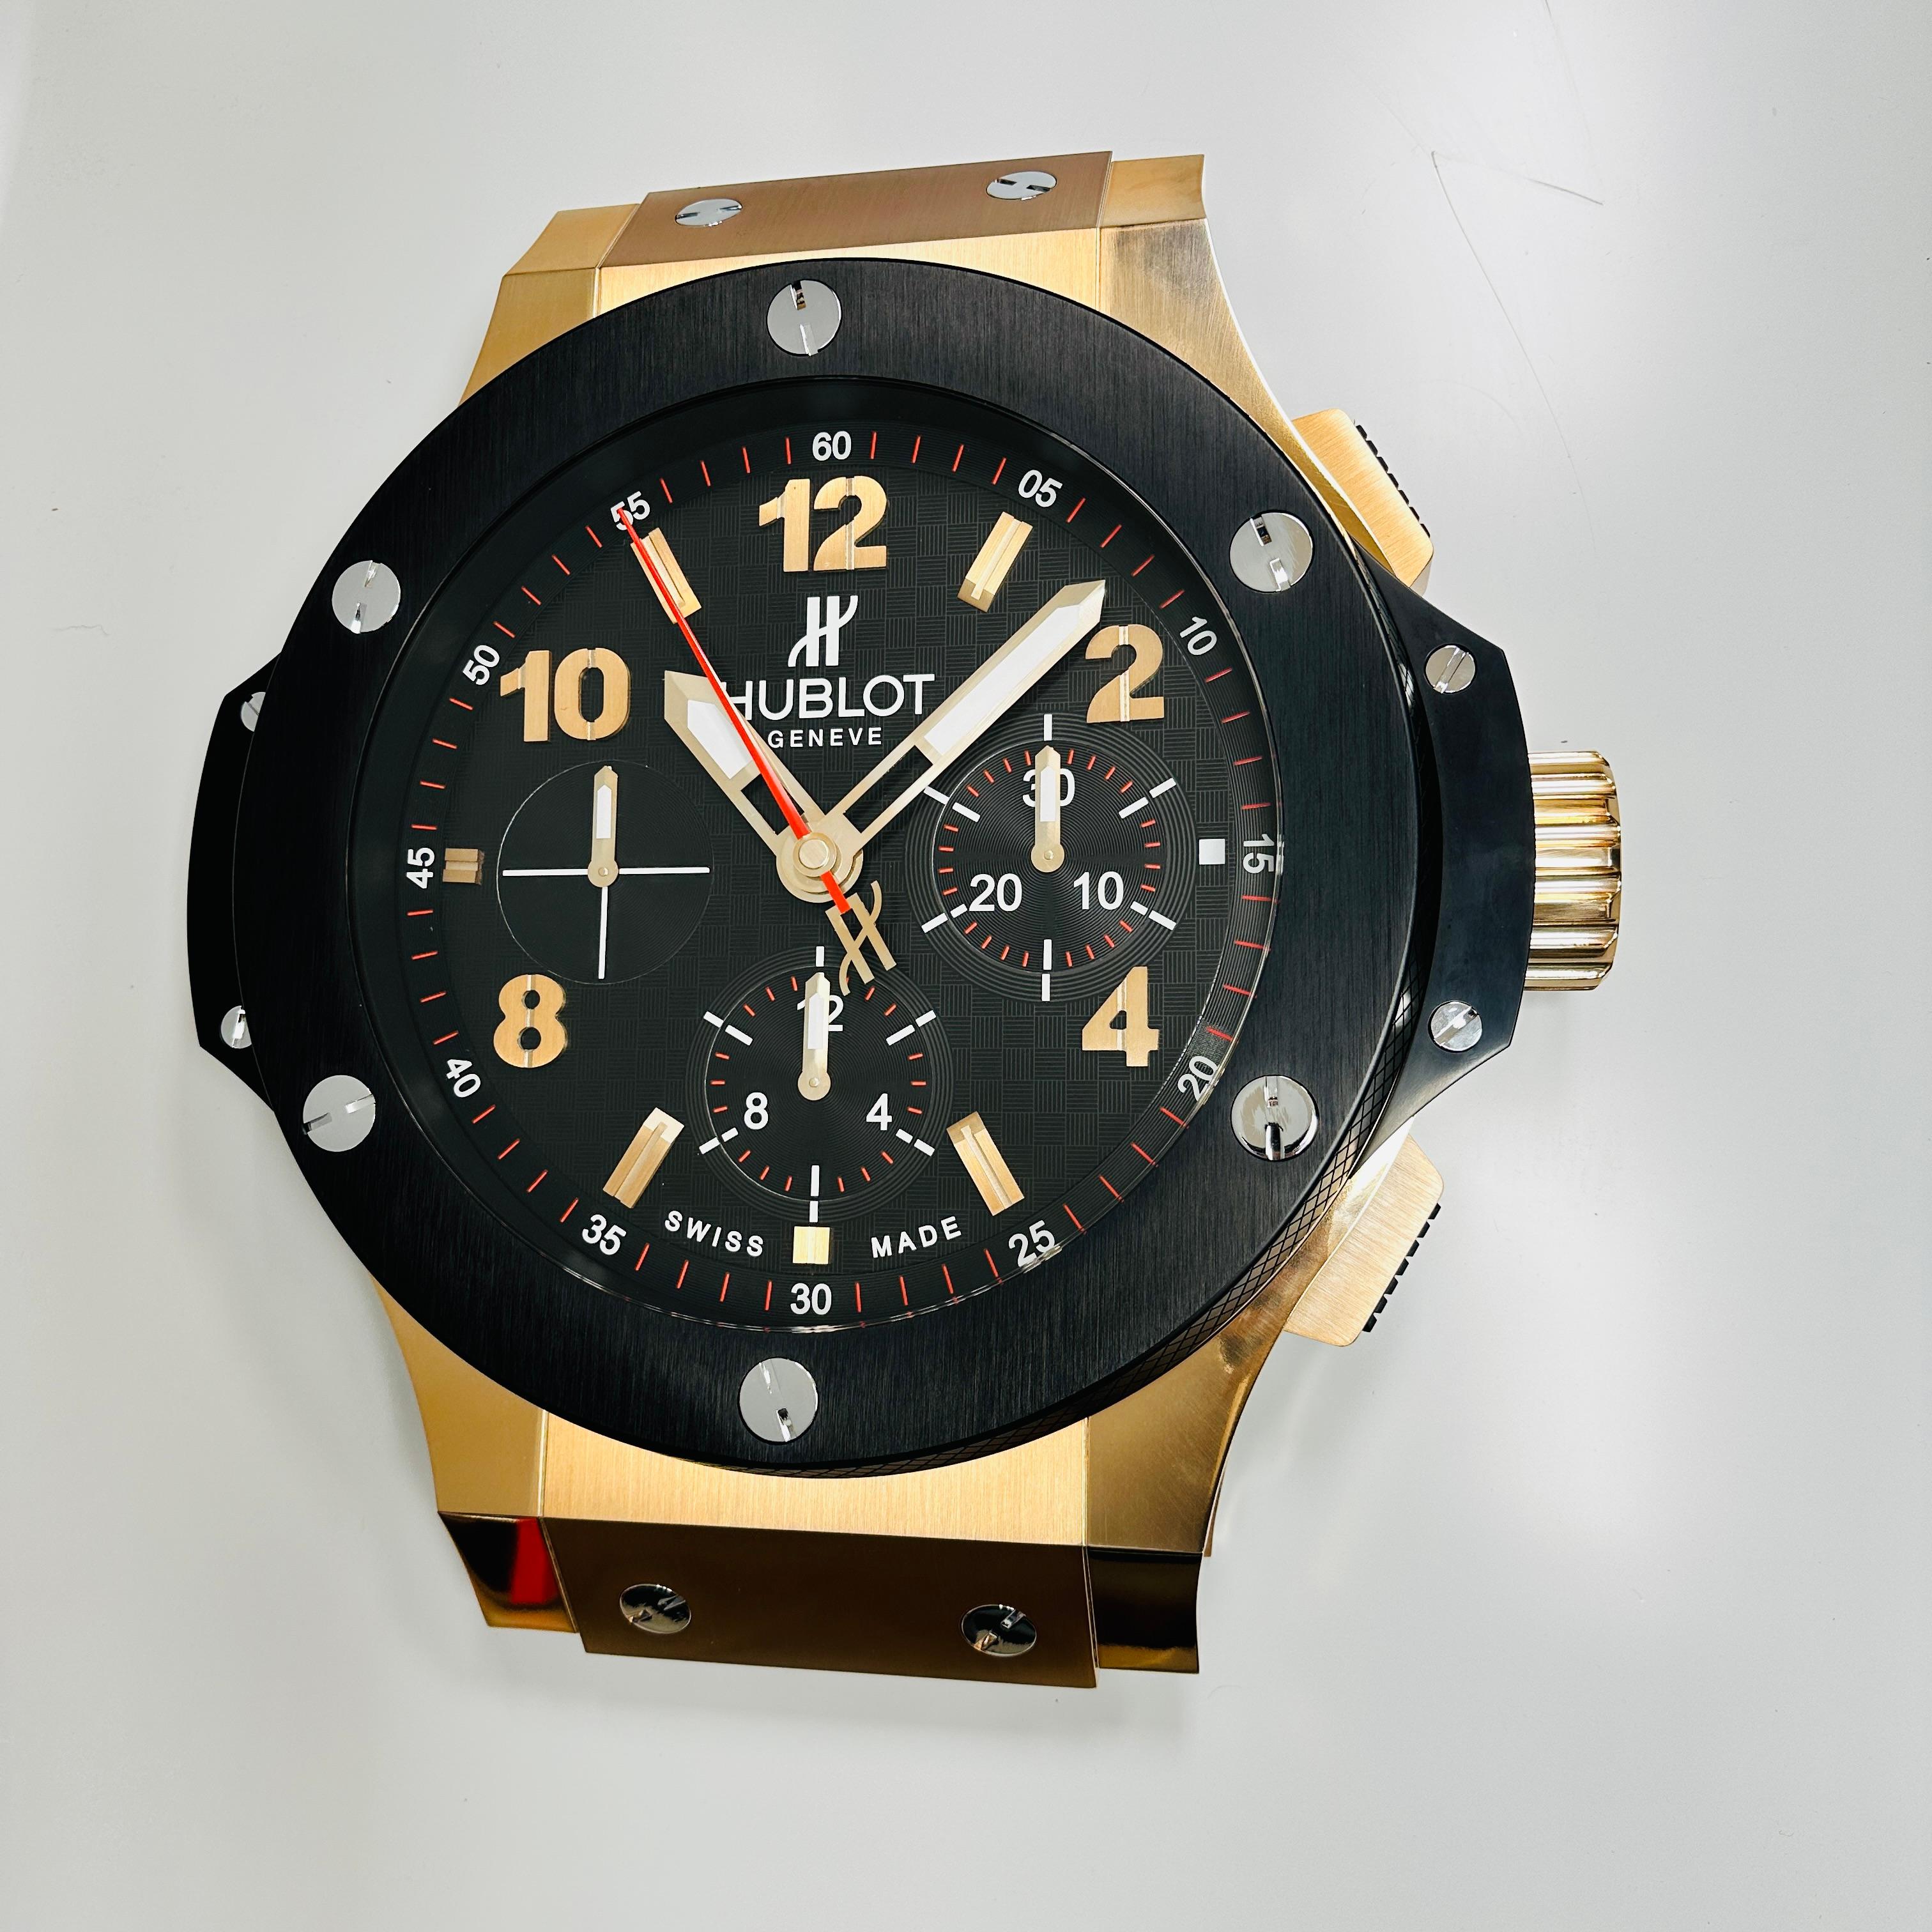 Hublot Big Bang Geneve XL wall clock in original case In Excellent Condition For Sale In Ottawa, ON